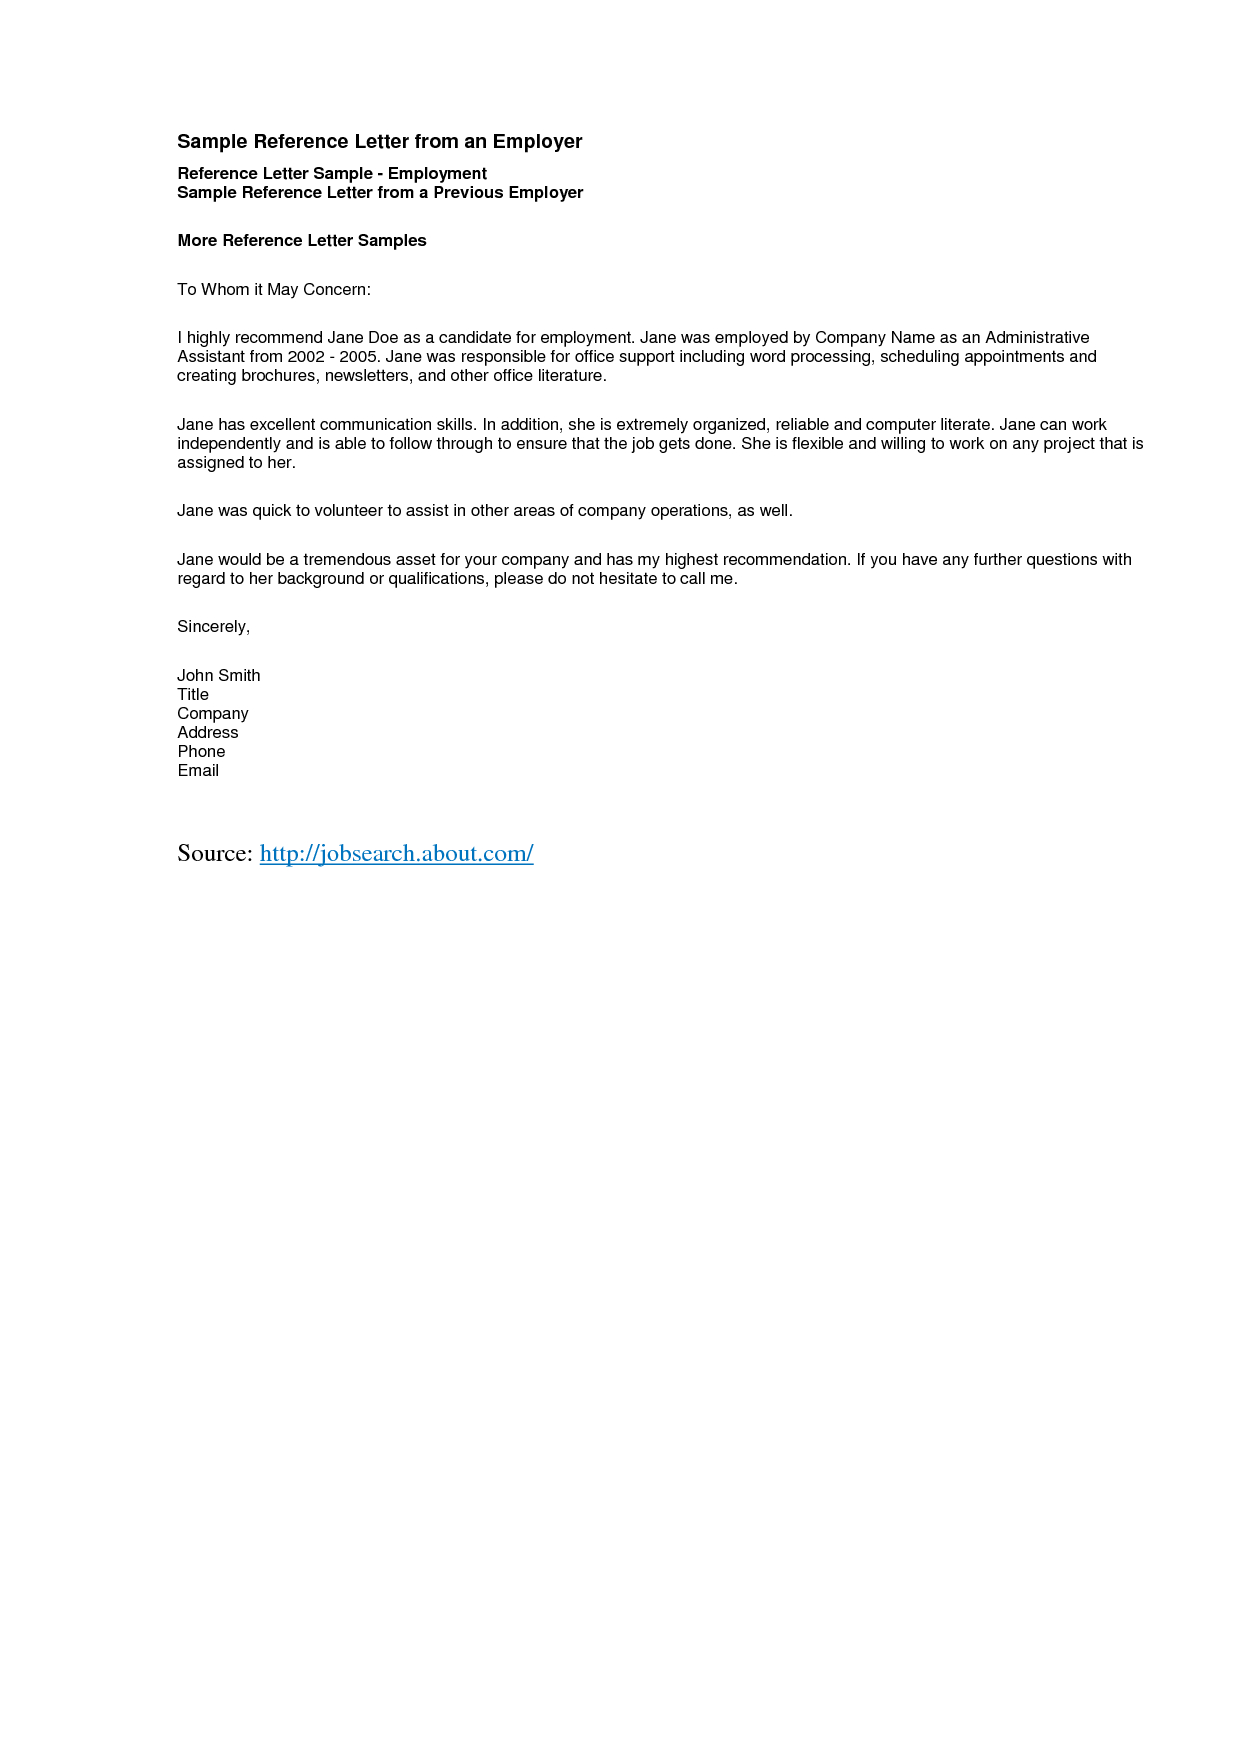 Sample Employers Reference Letter Debandje within dimensions 1240 X 1754